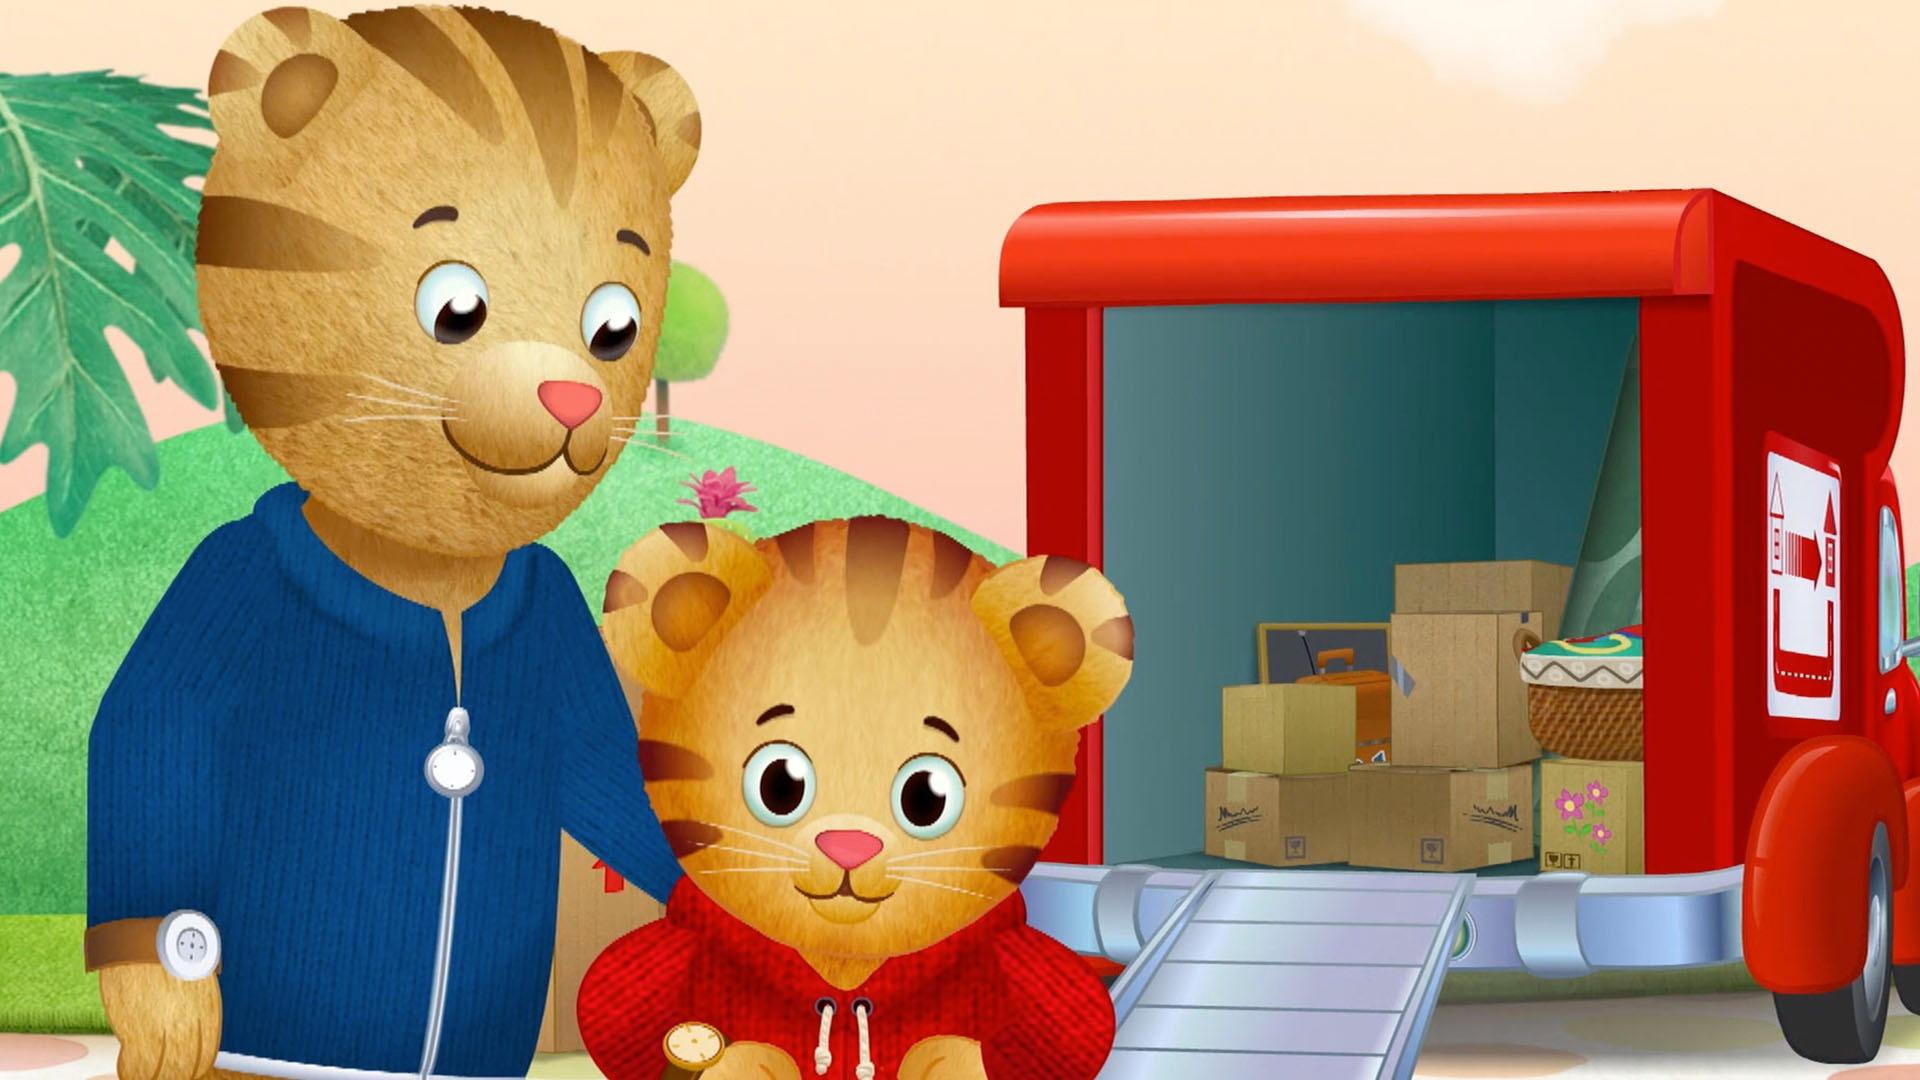 Daniel Tiger's Neighborhood - It's grr-ific! There's another new episode of Daniel  Tiger's Neighborhood coming up tomorrow on PBS KIDS (check local listings)!  Daniel and O are so excited to ride the